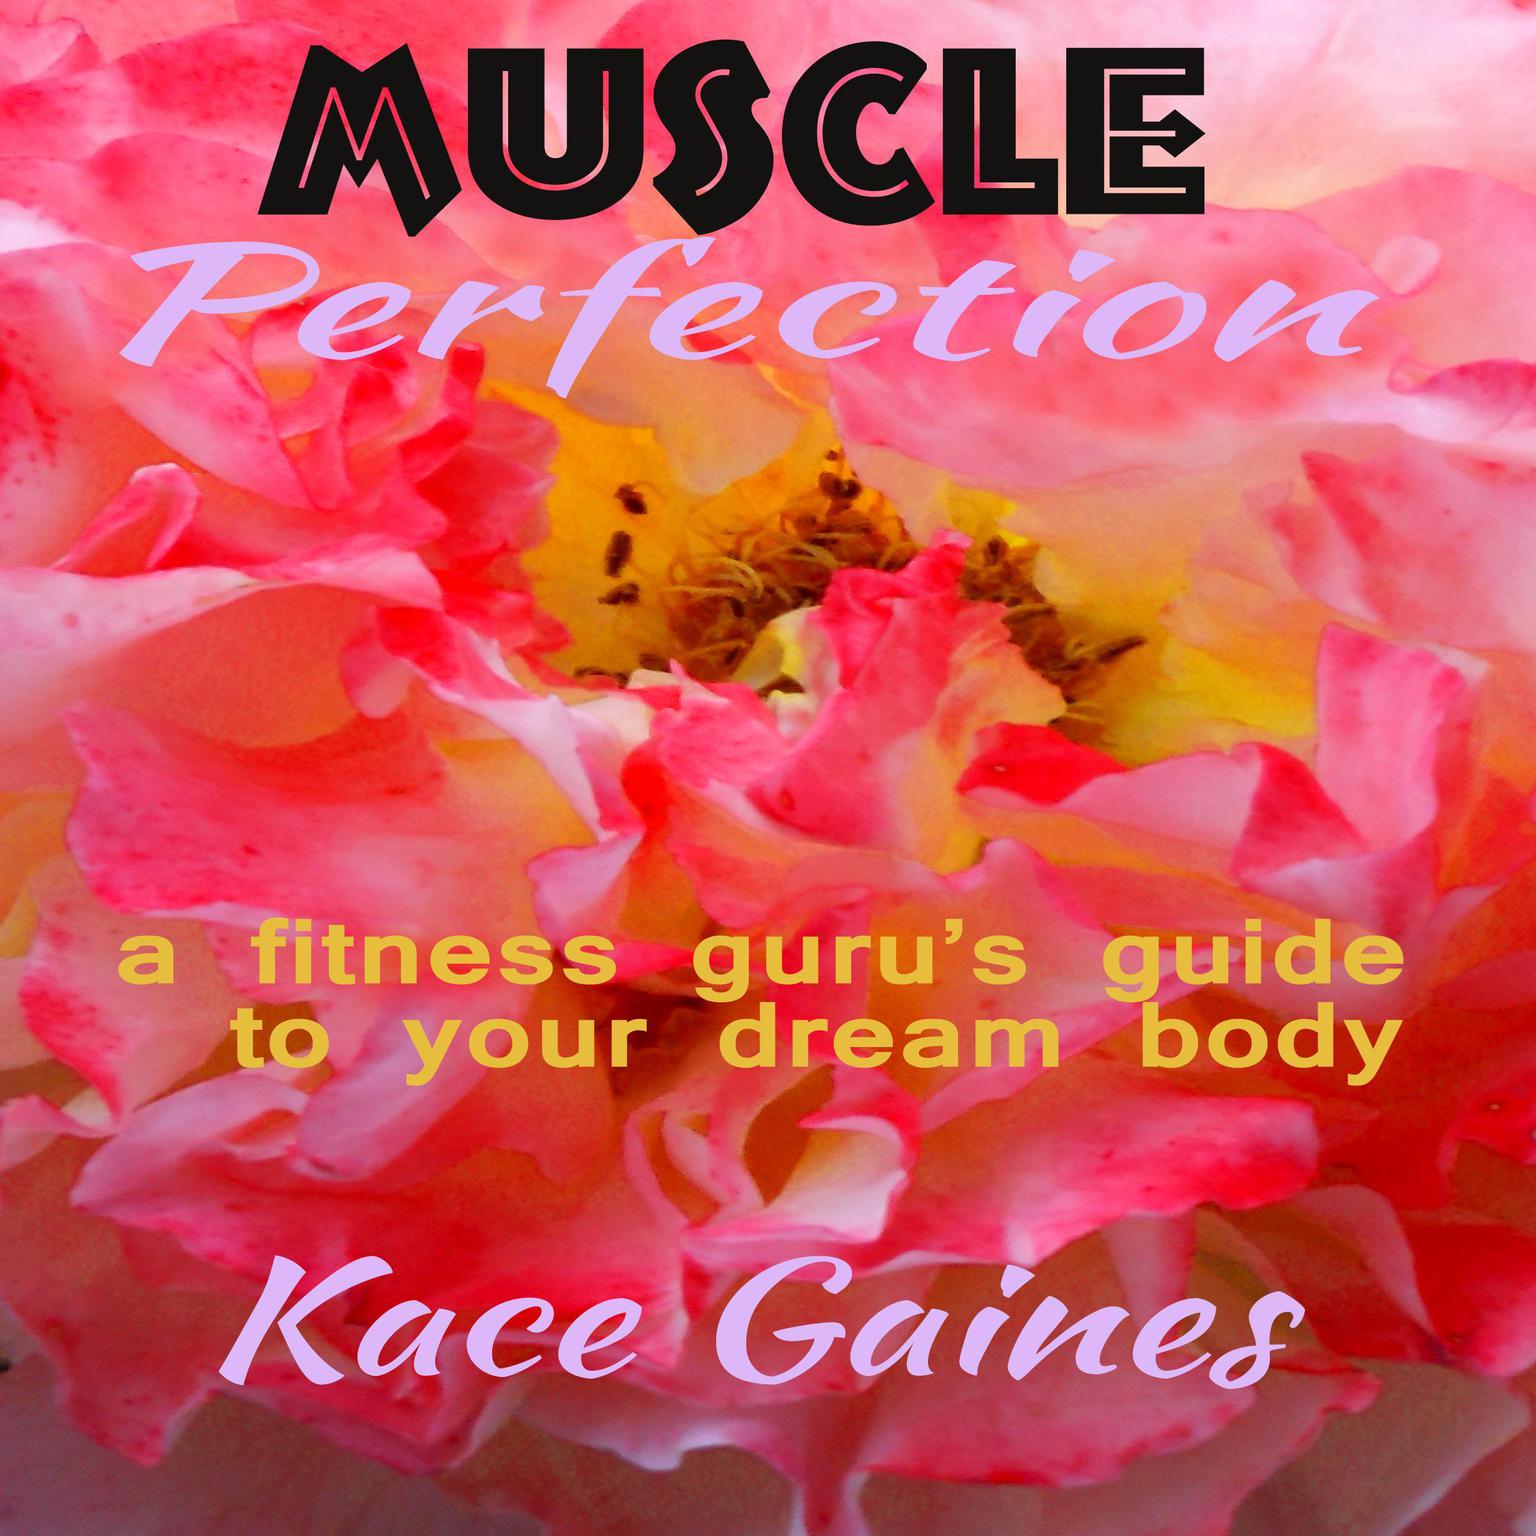 Muscle Perfection - a fitness gurus guide to your dream body Audiobook, by Kace Gaines